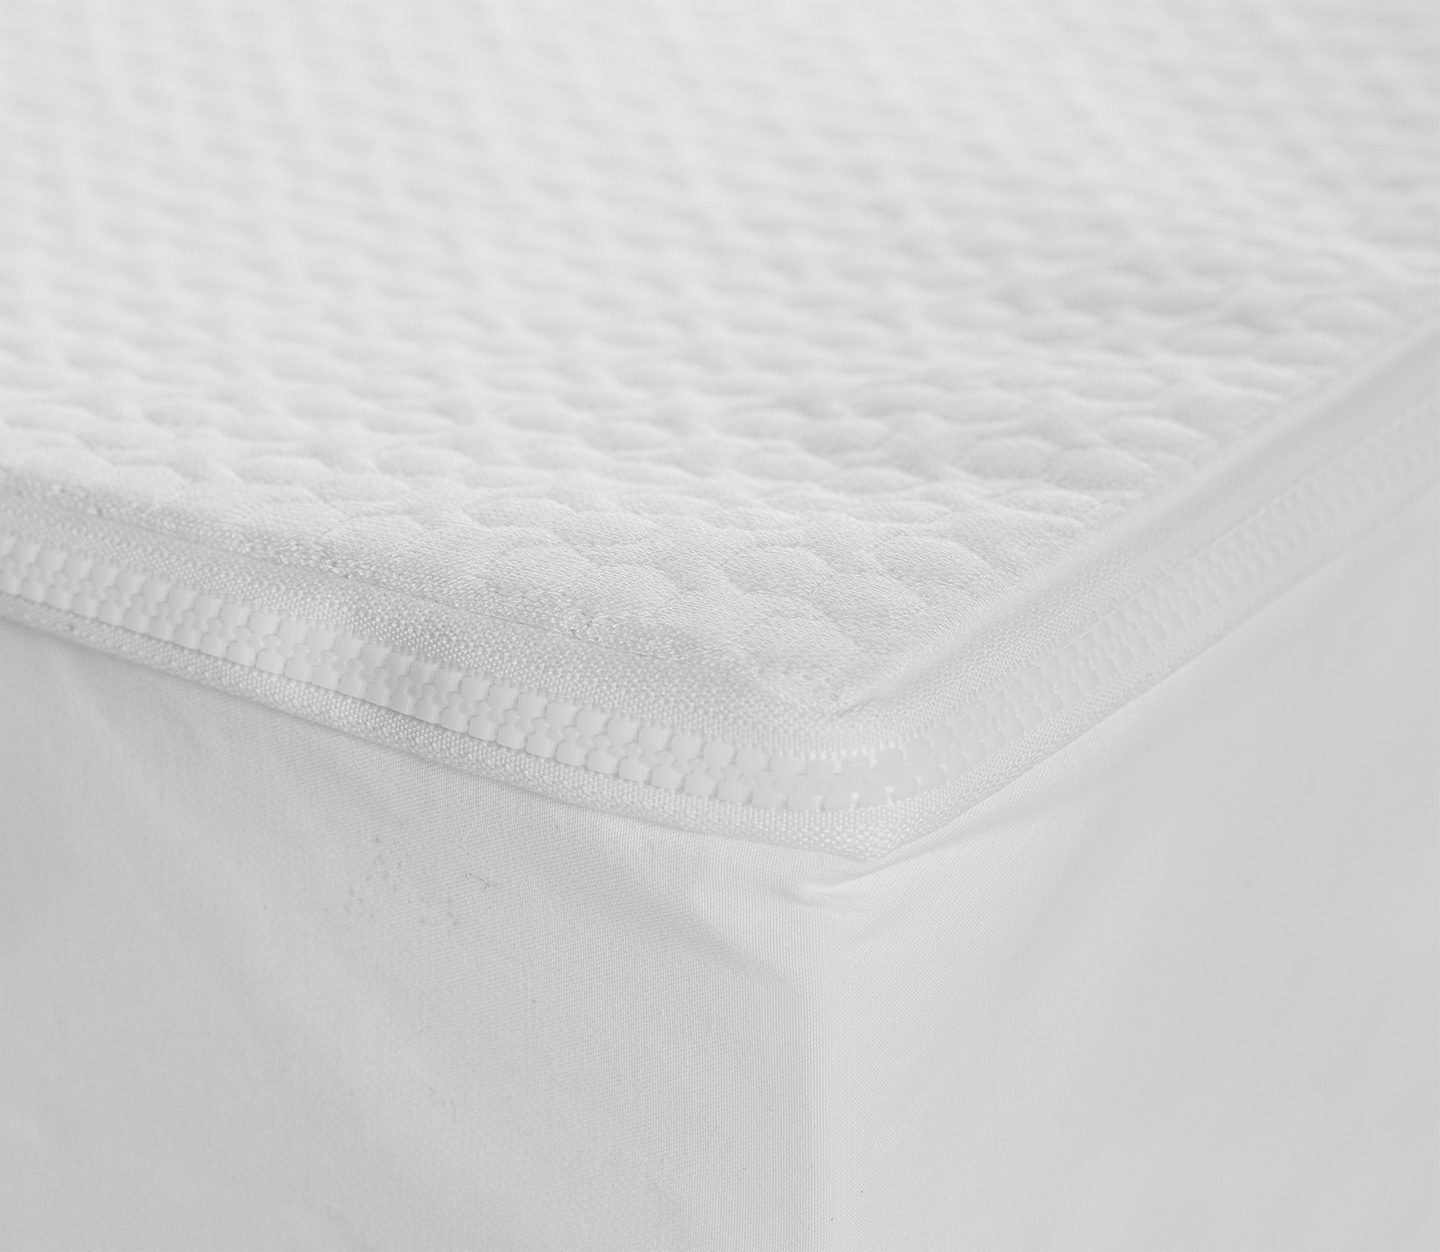 at Home Allerease Advanced Allergy Protection King Mattress Pad